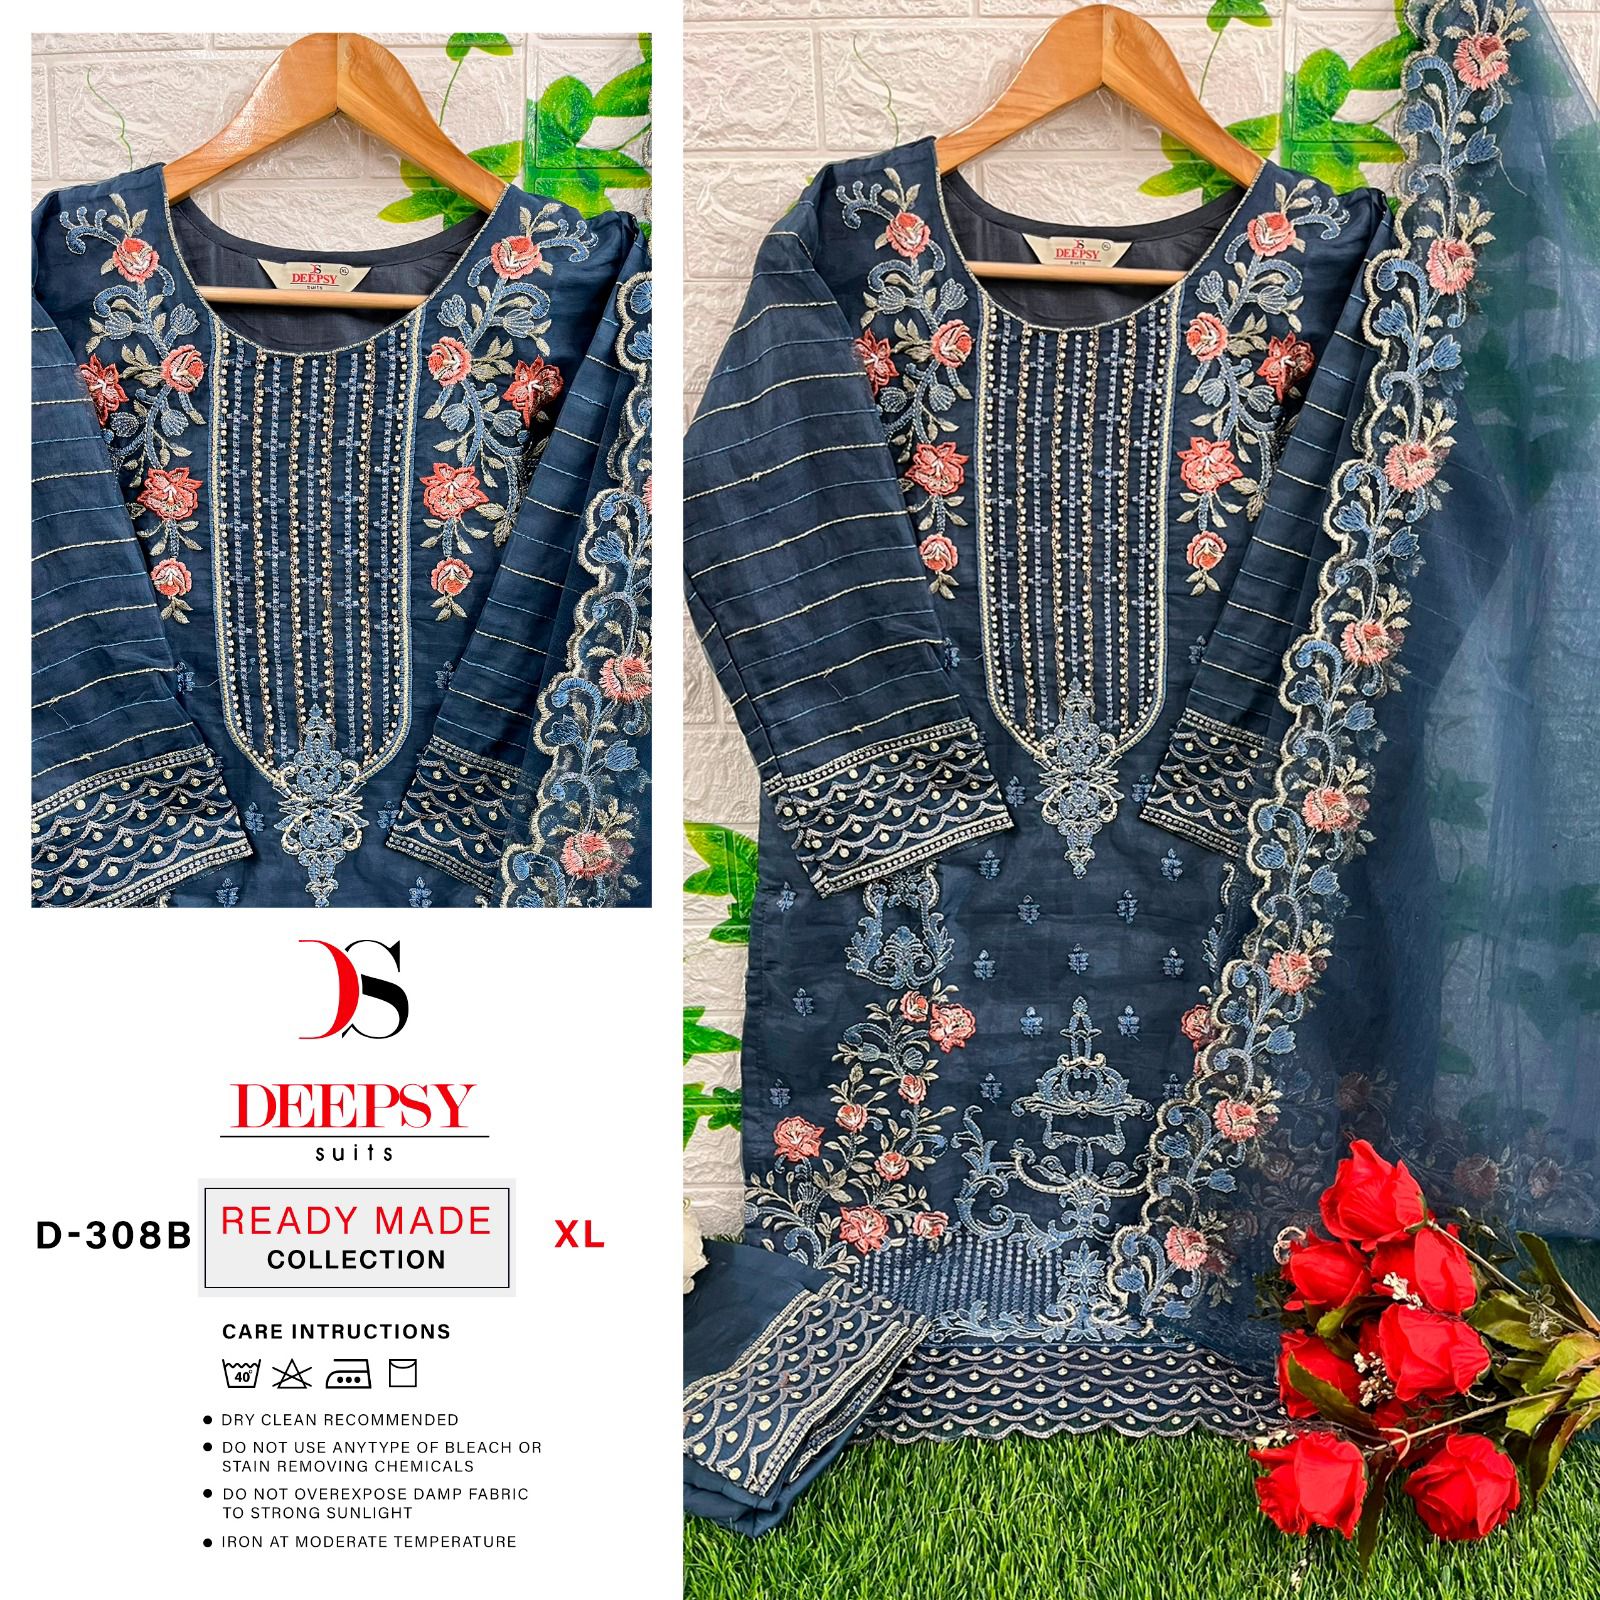 DEEPSY SUITS D 308 B READYMADE SUITS IN INDIA